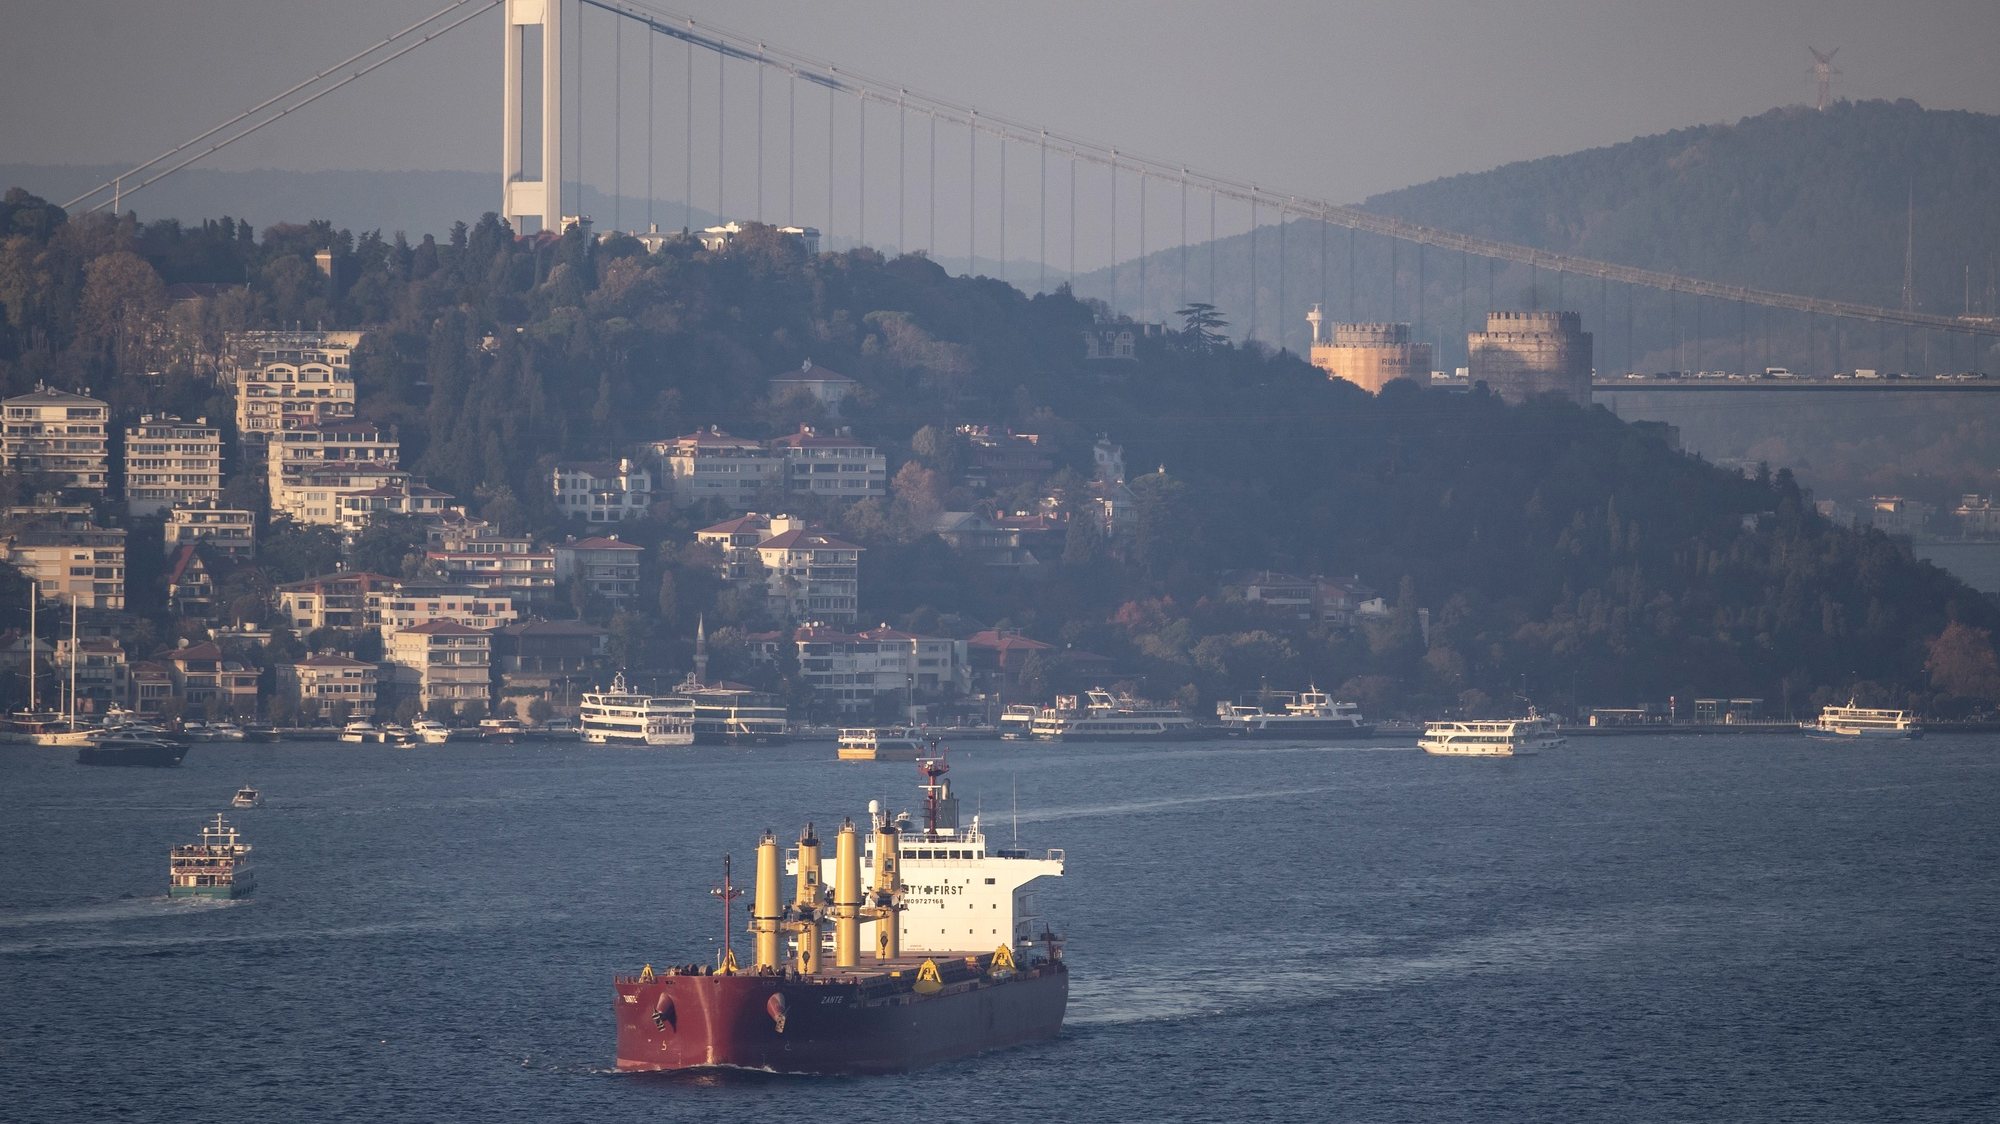 epa10281685 Cargo ship Zante, carrying Ukranian grain, sails on the Bosphorus Strait, in Istanbul, Turkey, 02 November 2022. On 02 November Russian Defence Ministry in a statement announced Russia will resume its participation in the grain exports deal, after suspending its participation on 29 October.  EPA/ERDEM SAHIN